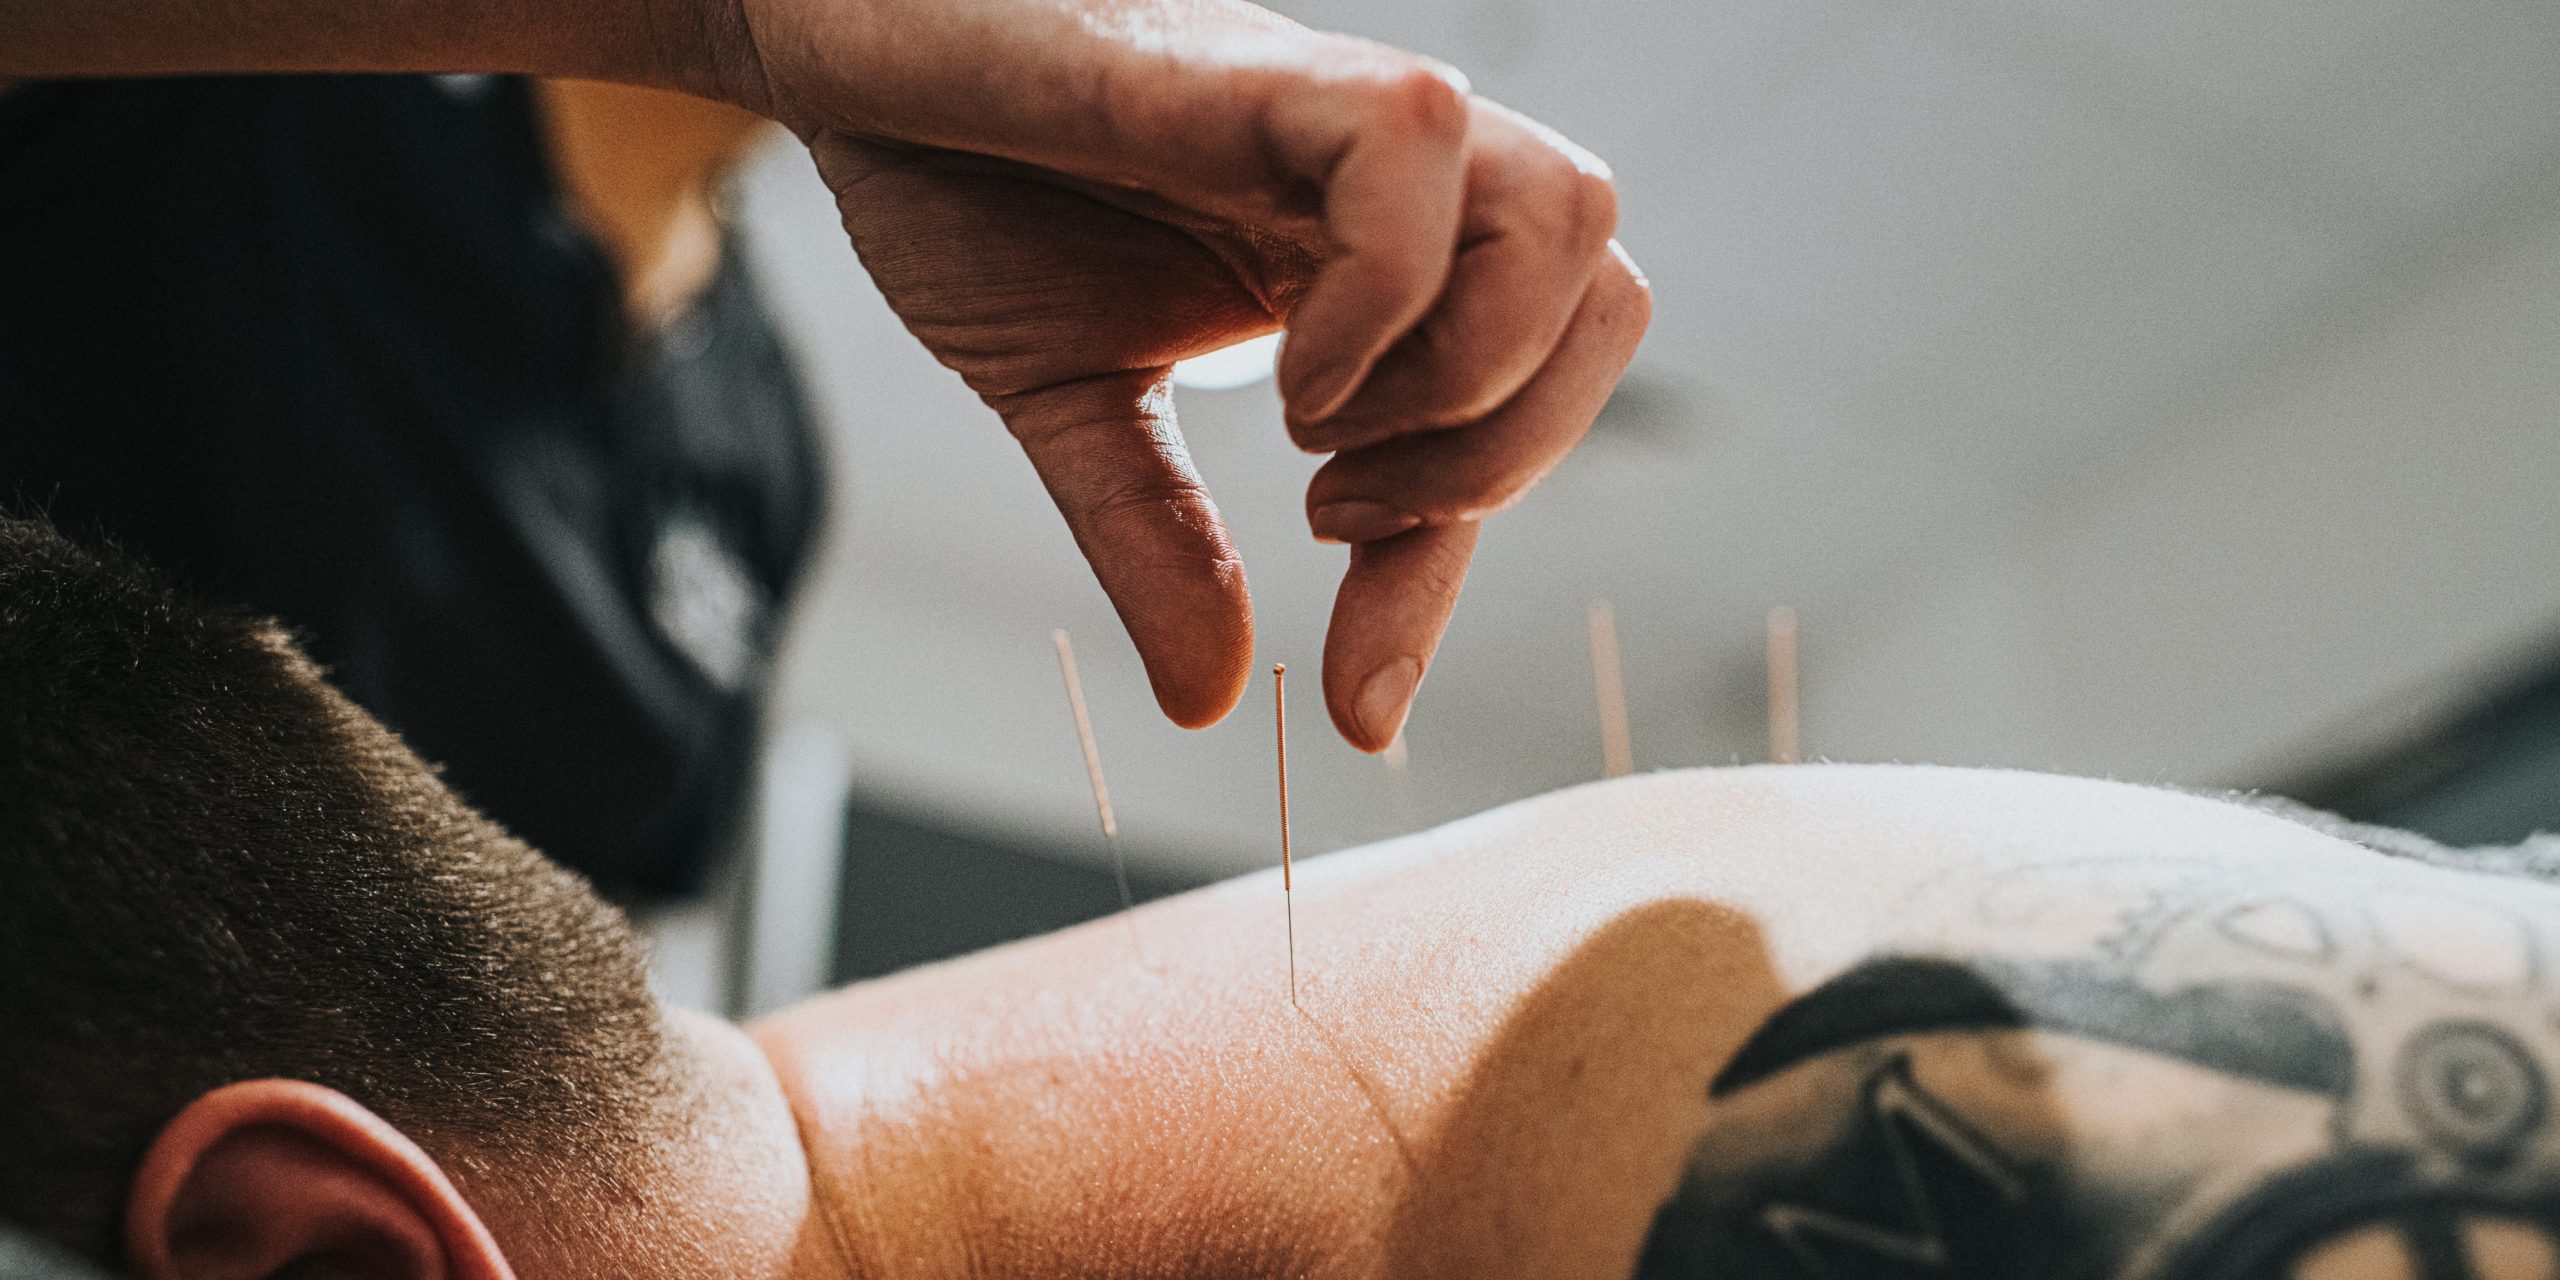 A man lays facedown as an acupuncturist places an acupuncture needle on his back.